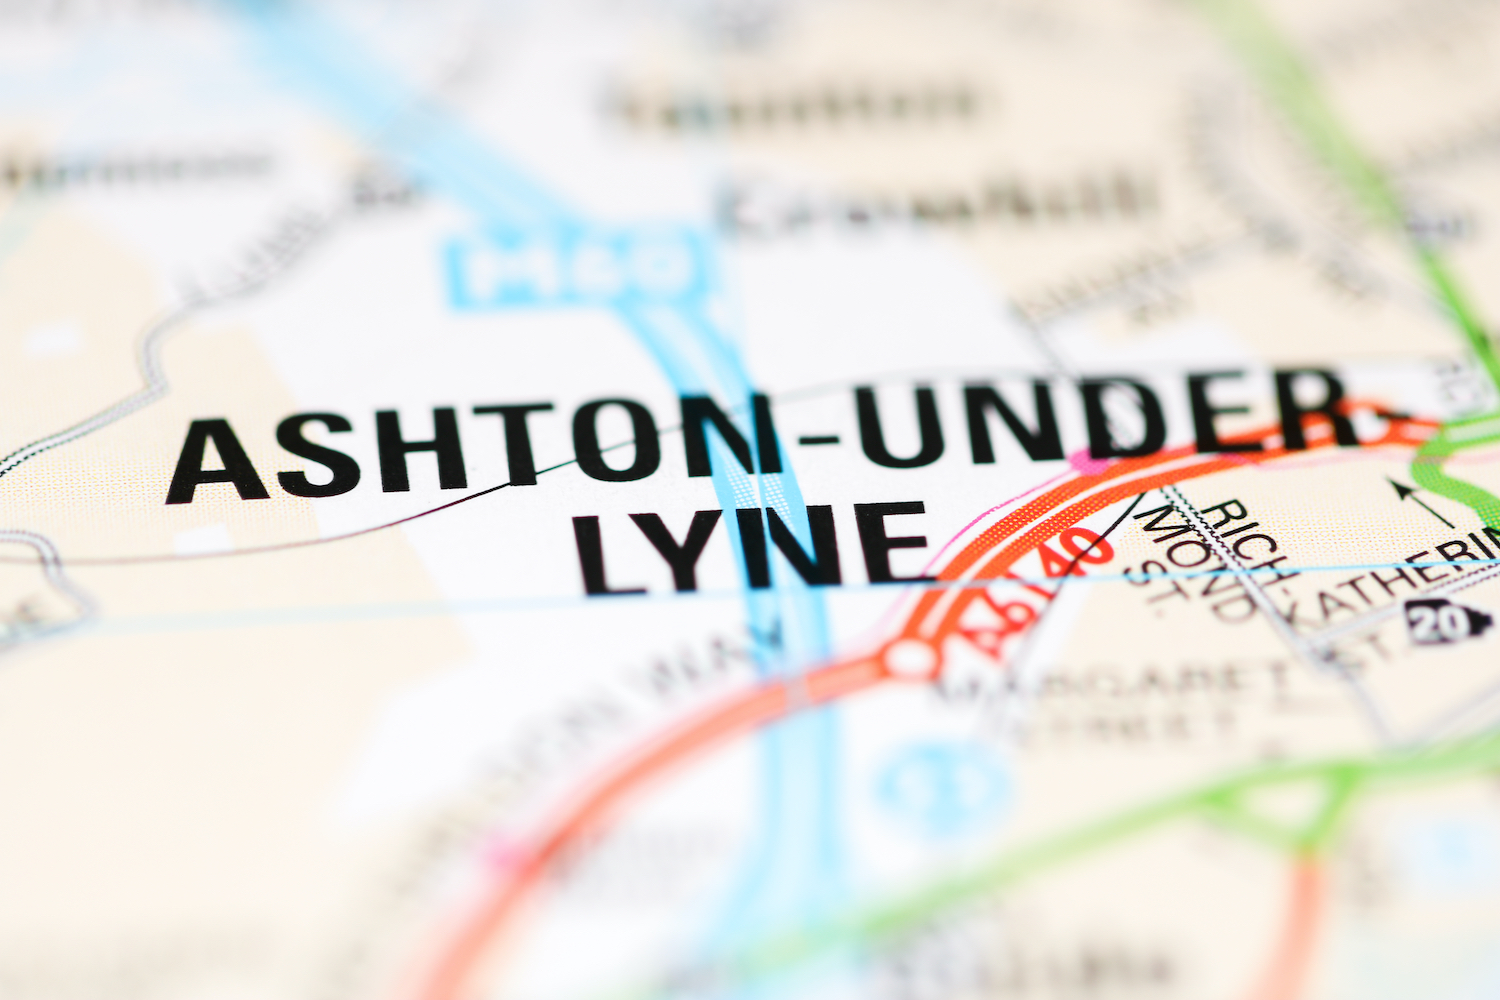 Ashton-under-Lyne offers fantastic self-storage services and some great local attractions.